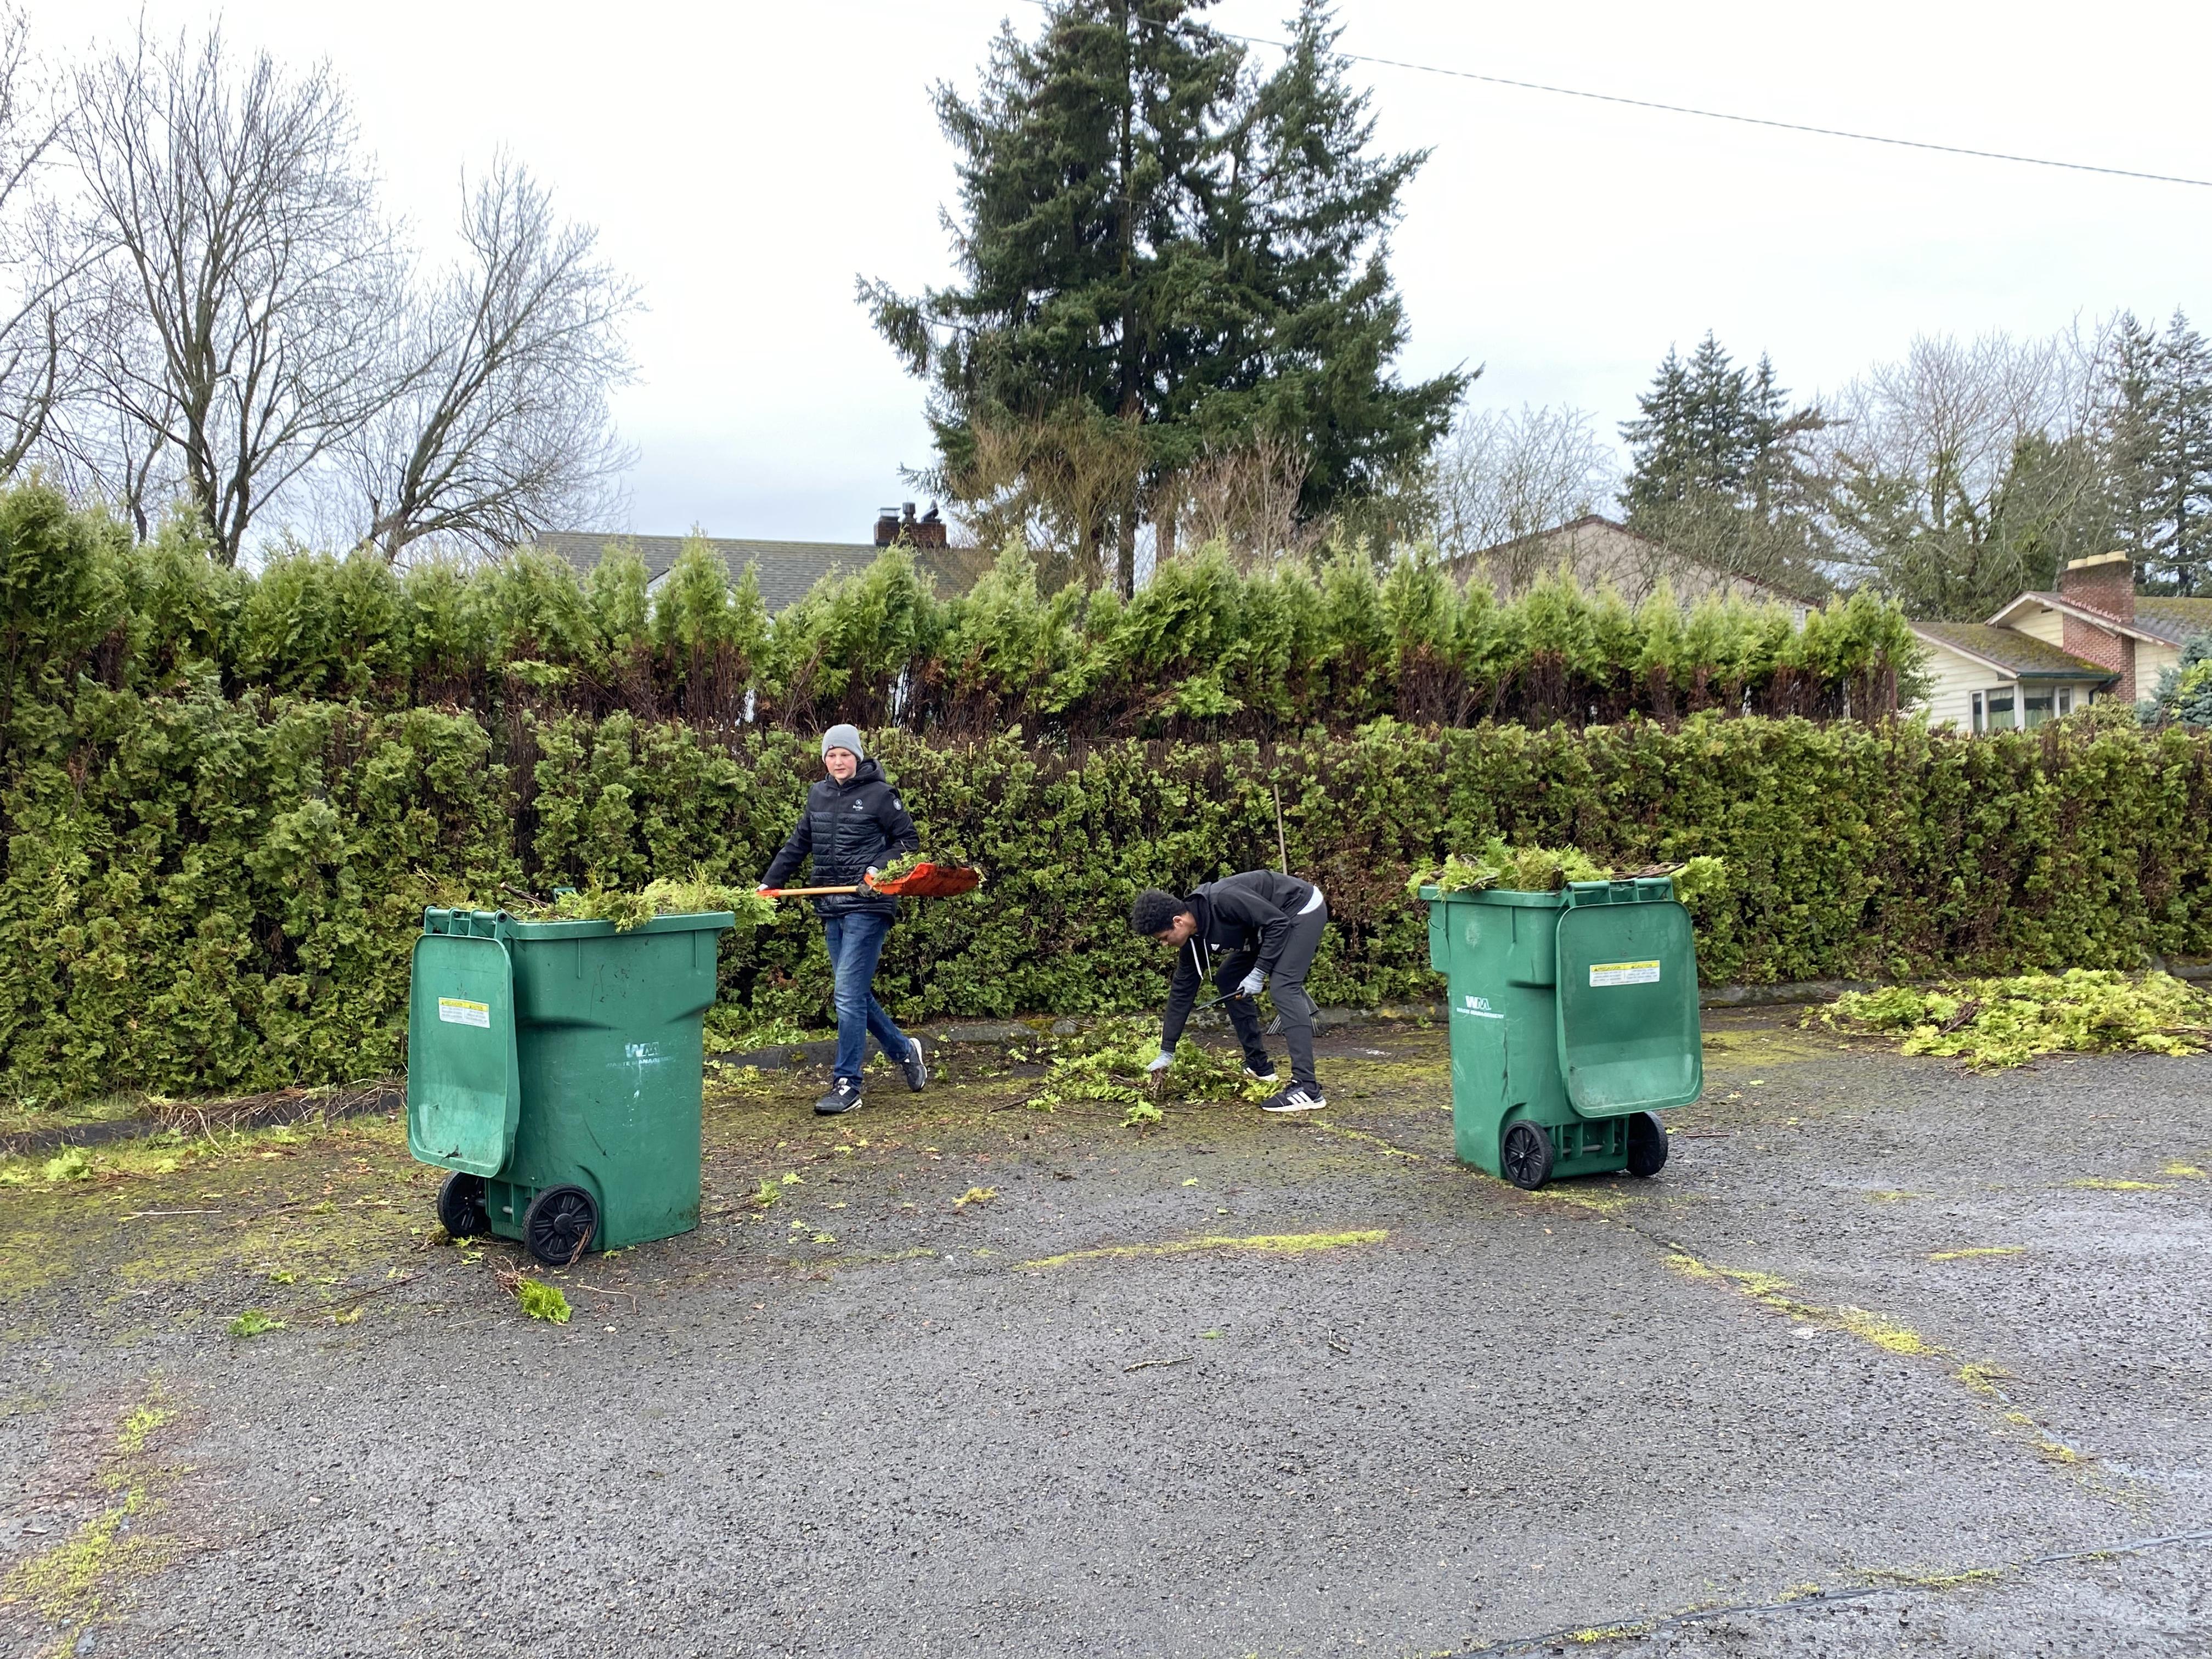 Students filling a dumpster